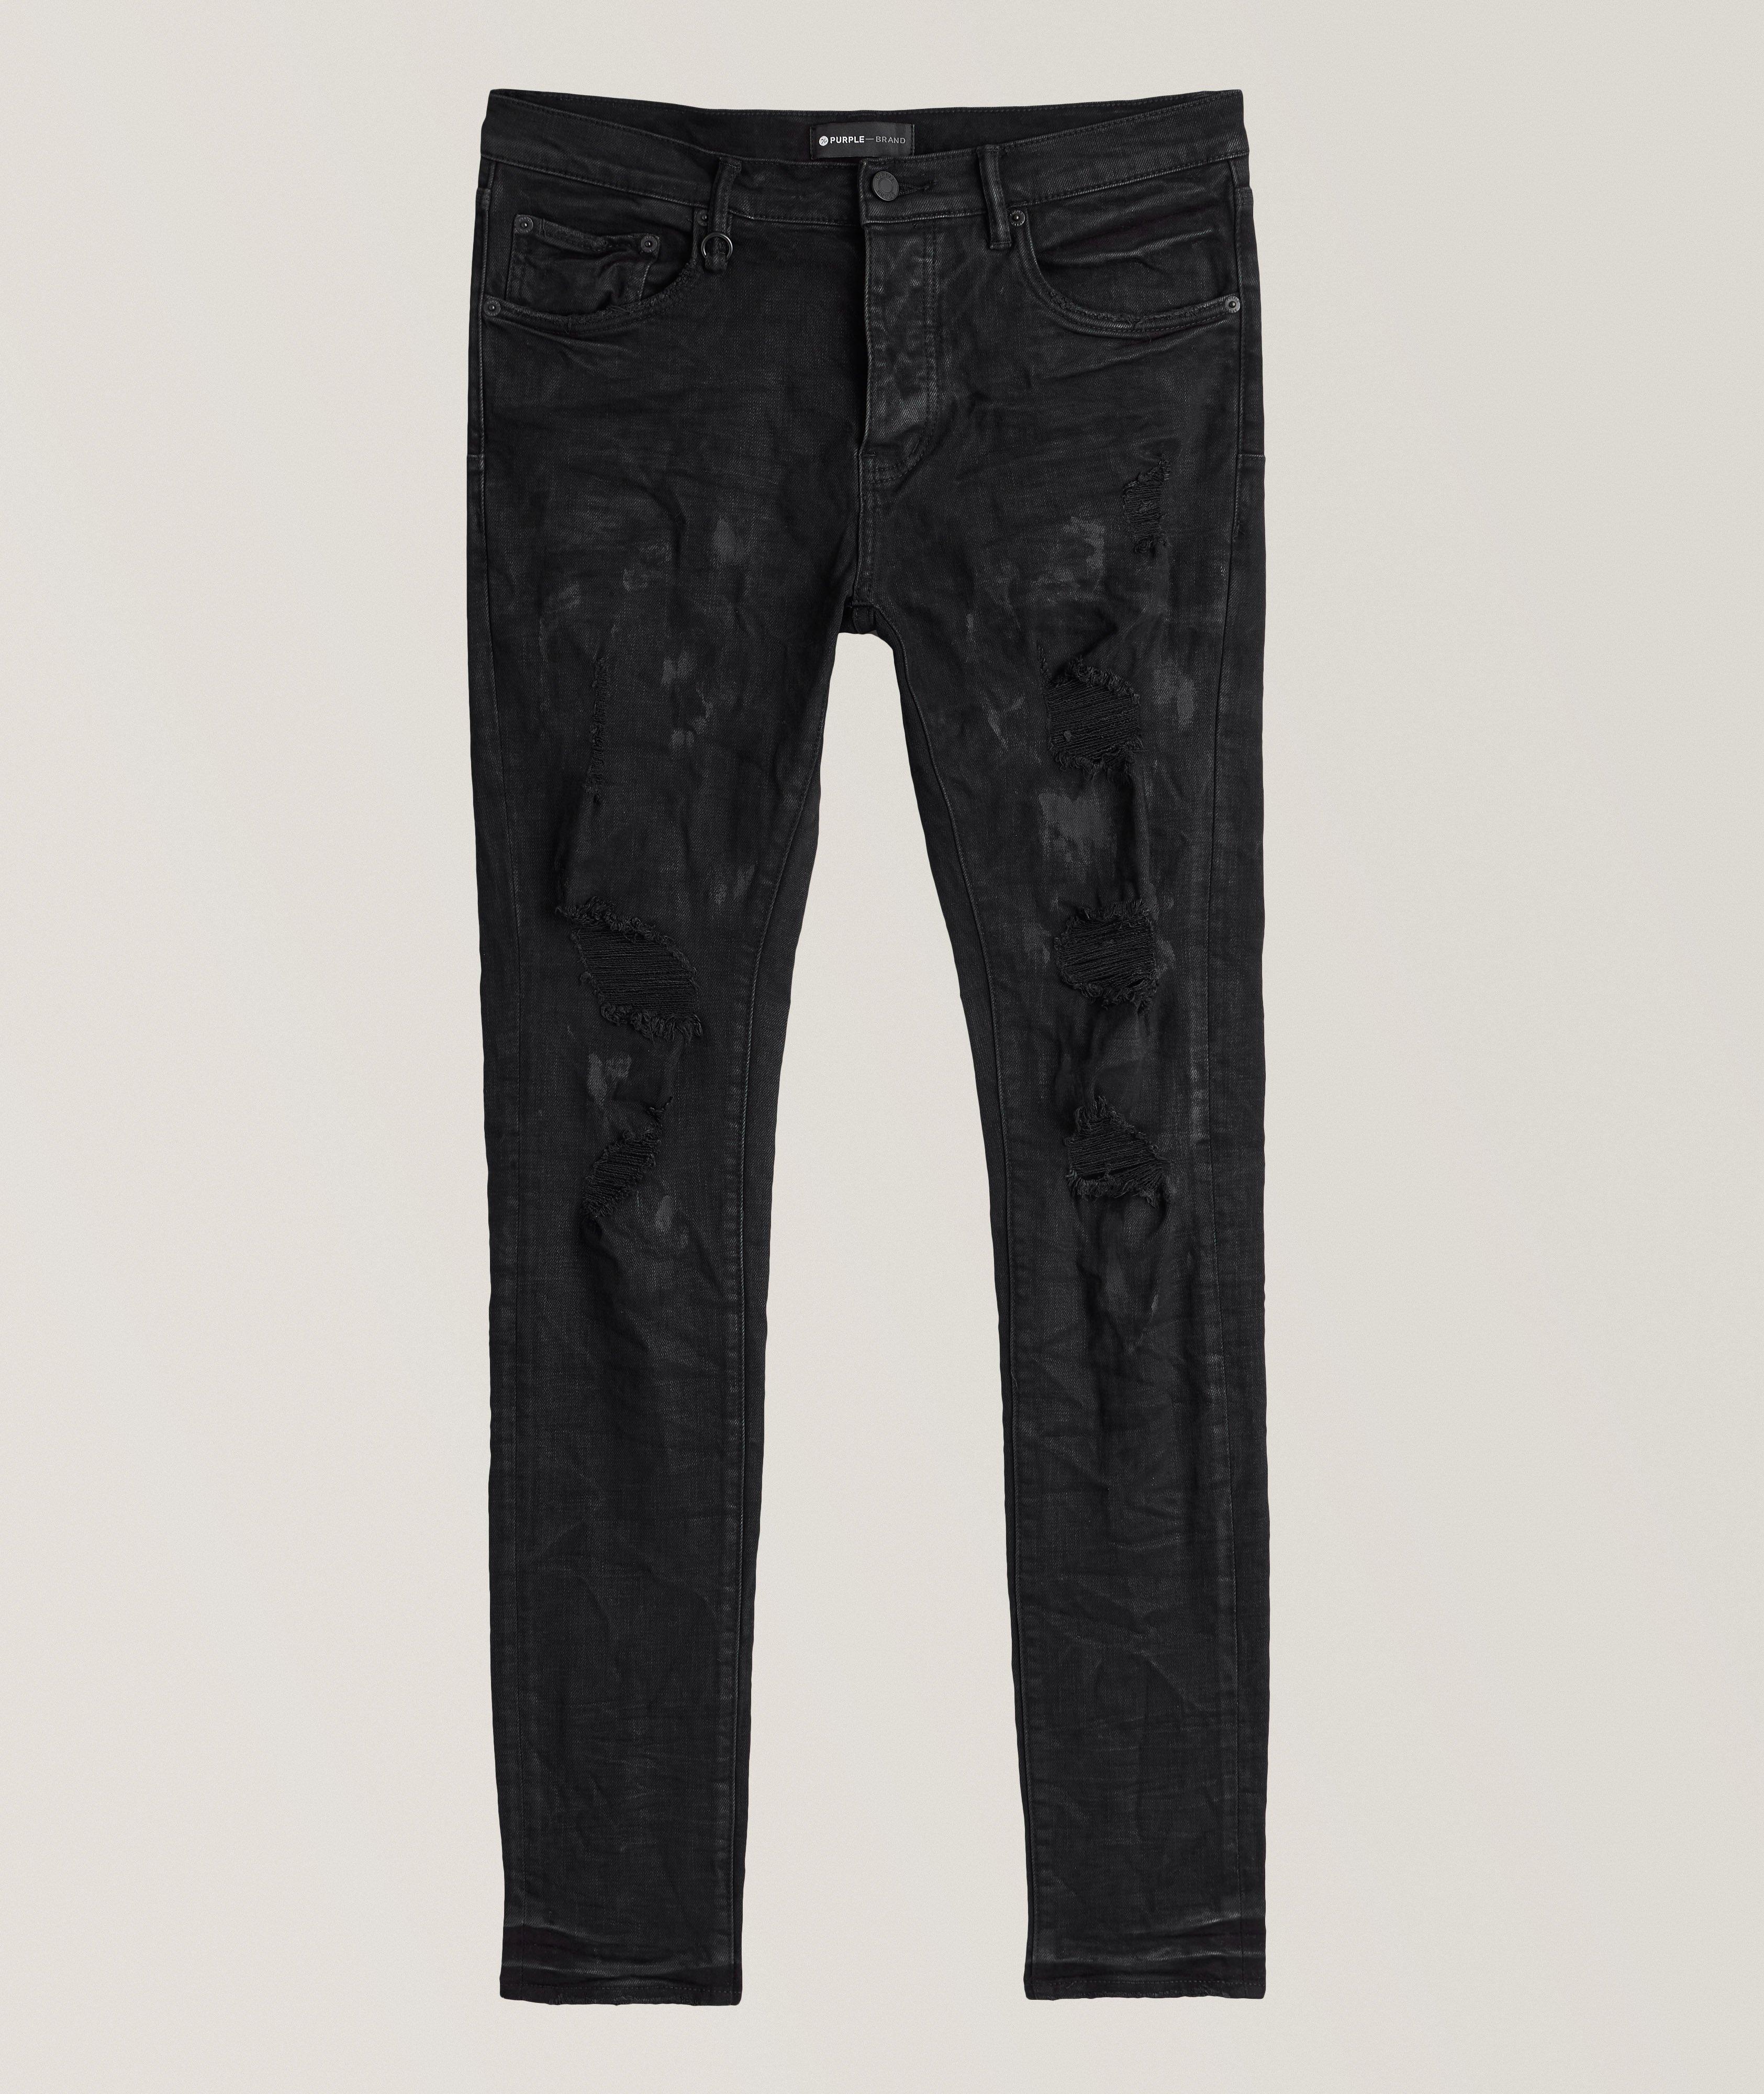 P001 Oil Spill Distressed Skinny Jeans image 0